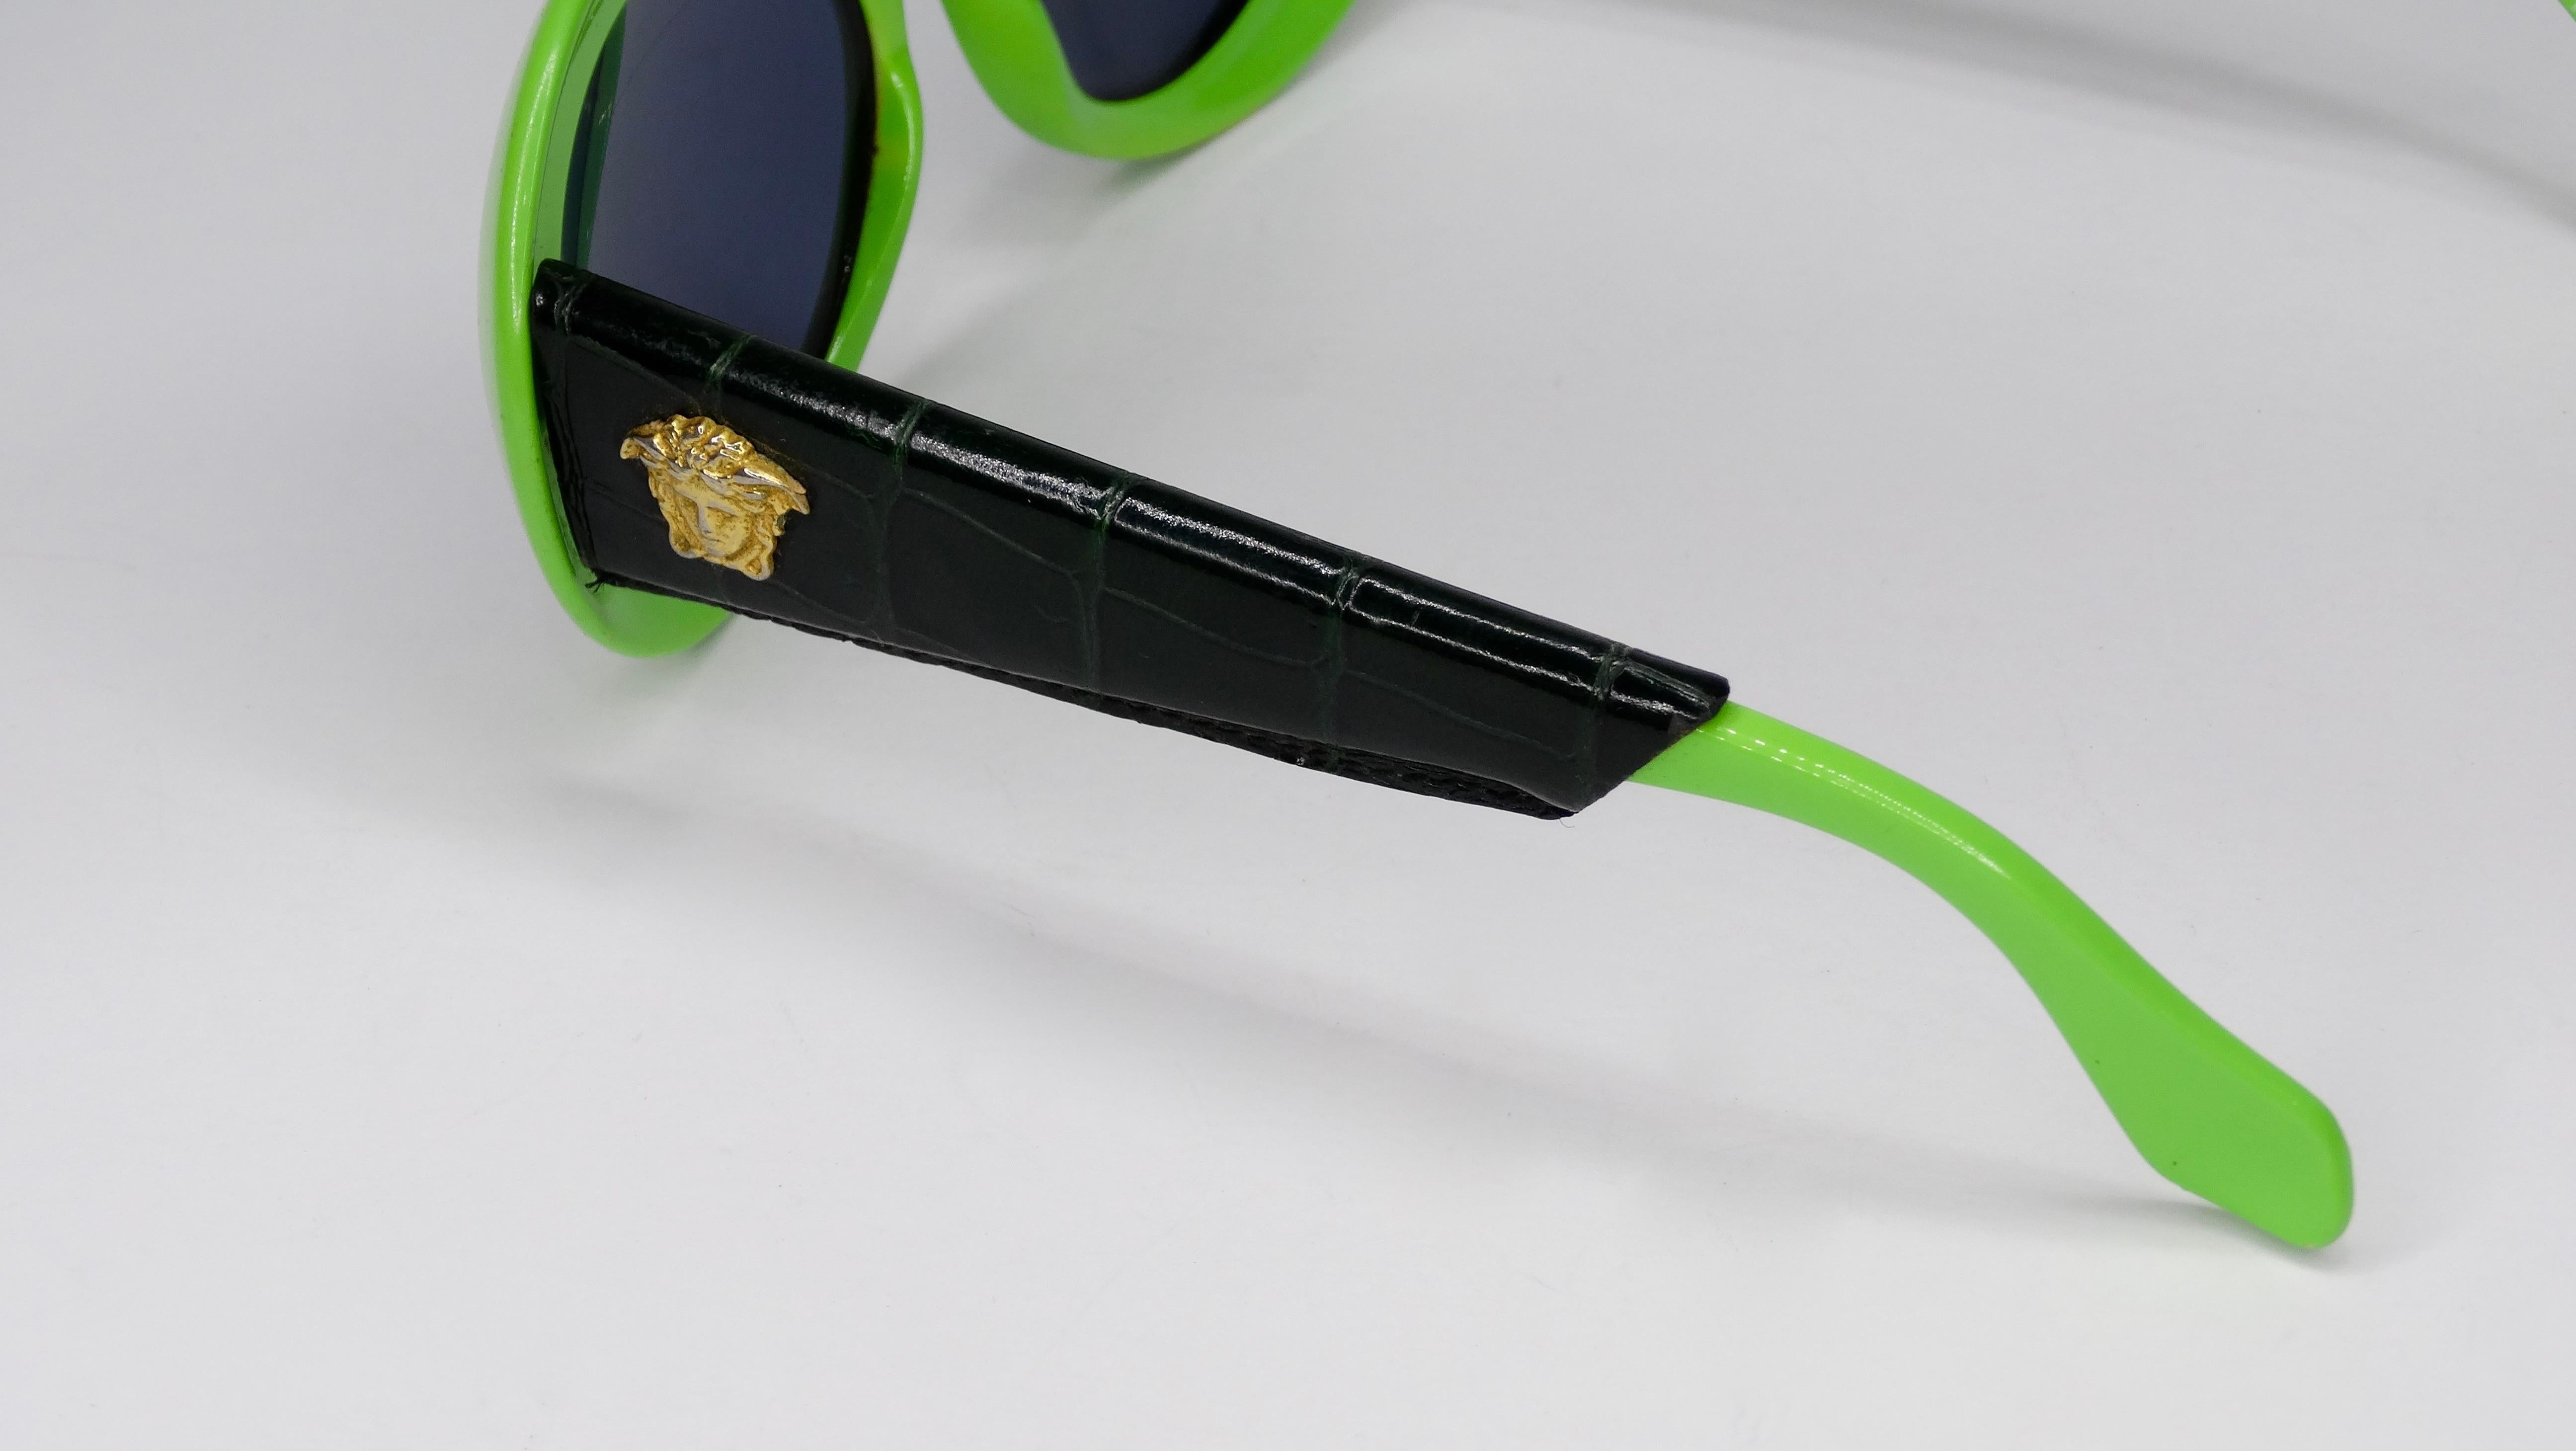 Your new favorite accessory! Circa late 1980s/early 1990s, these amazing sunglasses feature a lime green oval frame with leather black crocodile embossed arms and a Medusa head. The perfect pop of color for all your Versace looks! Comes with case.